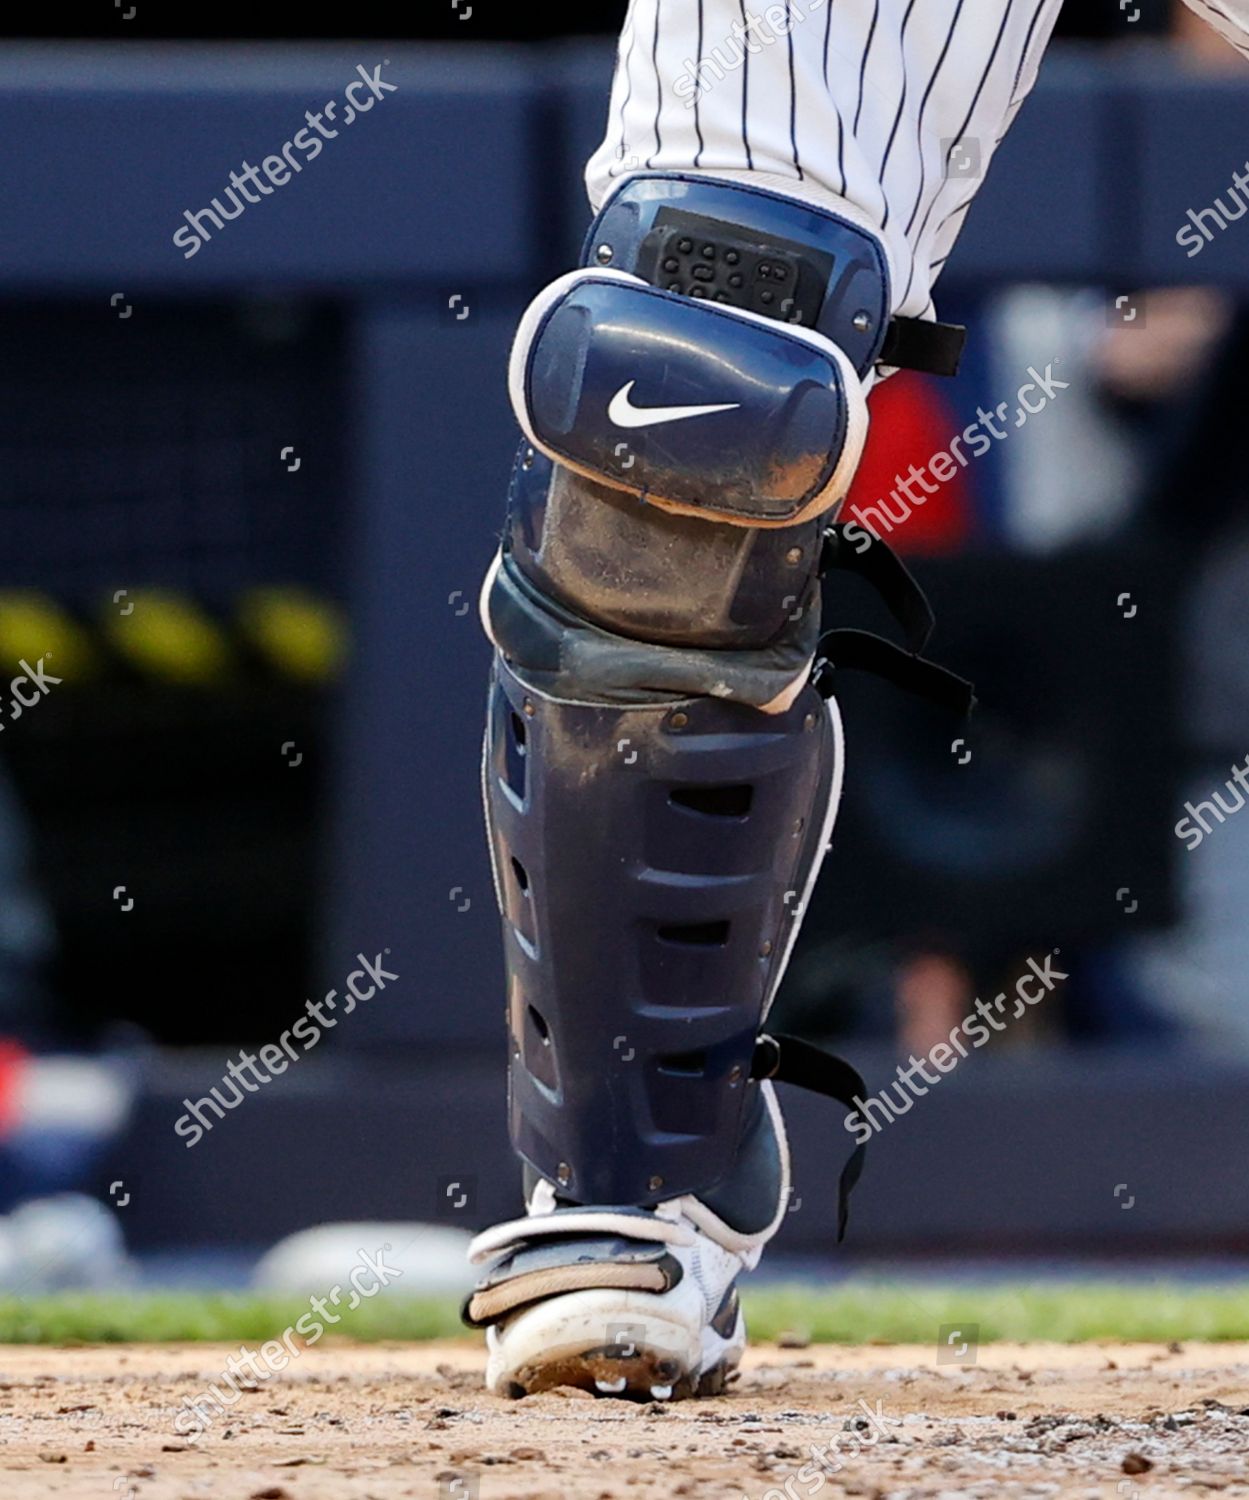 1,929 Kyle Higashioka Photos & High Res Pictures - Getty Images